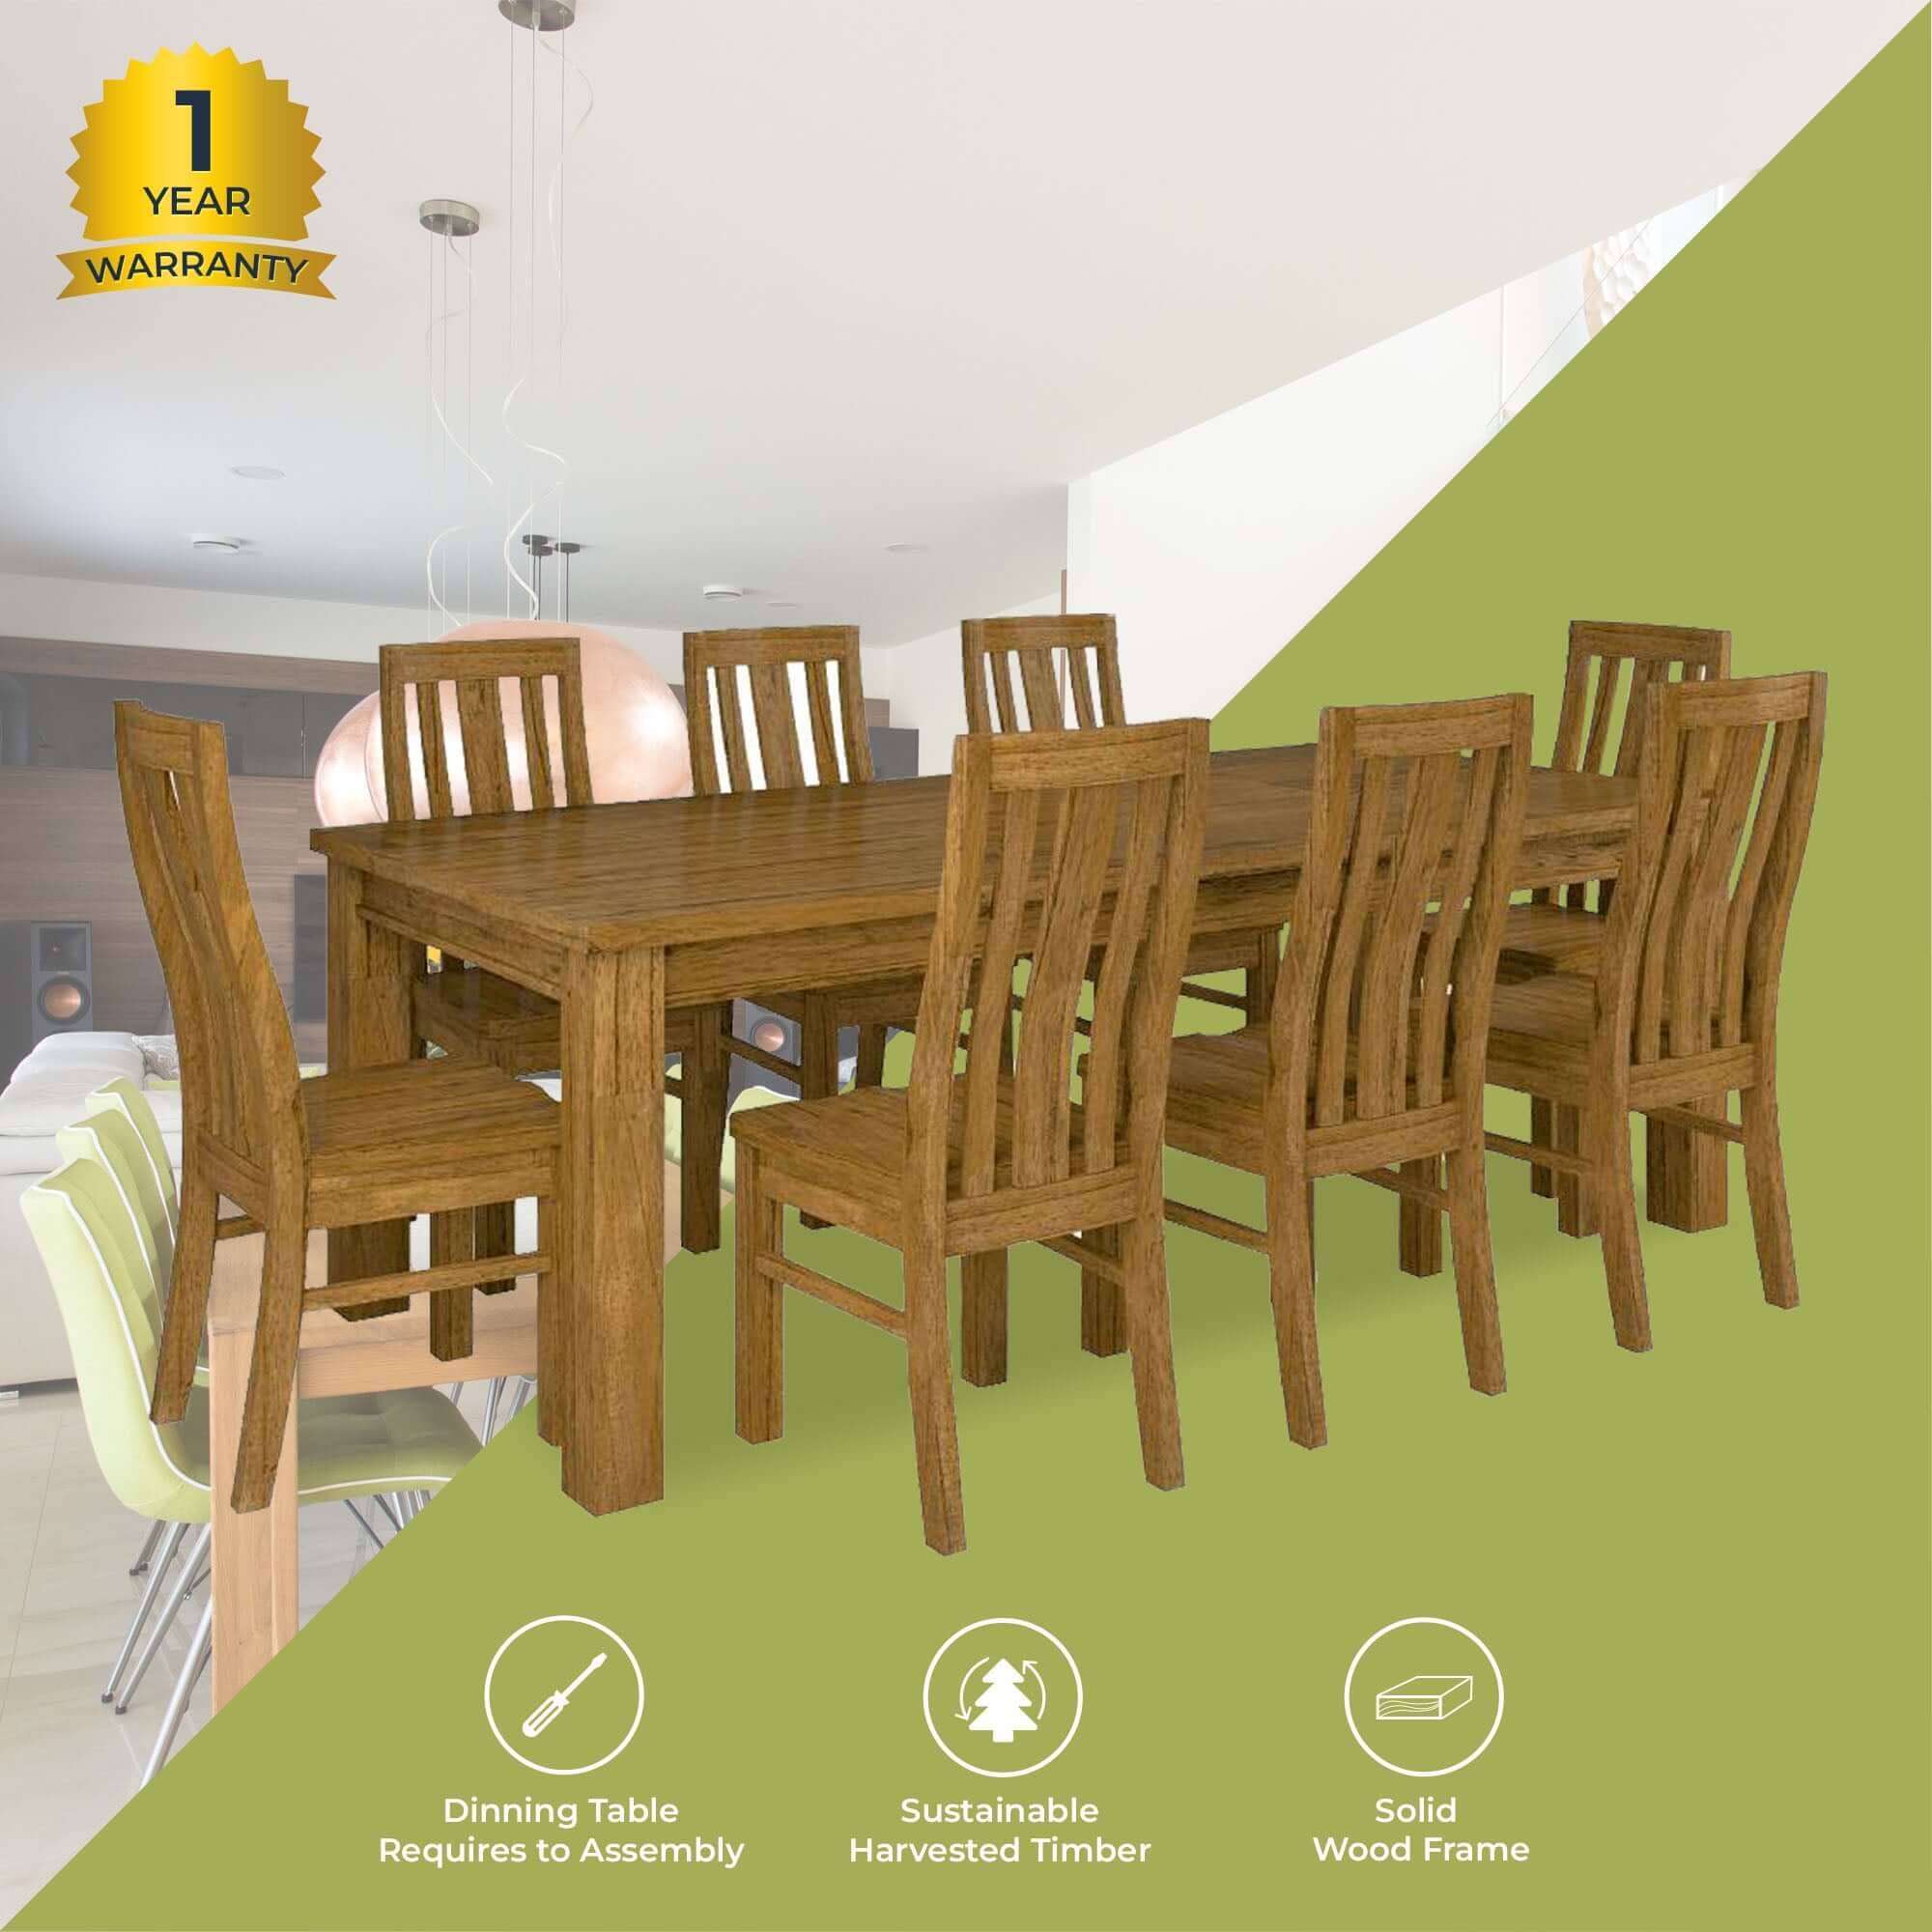 Birdsville 9pc Dining Set 225cm Table 8 Chair Solid Mt Ash Wood Timber - Brown-Upinteriors